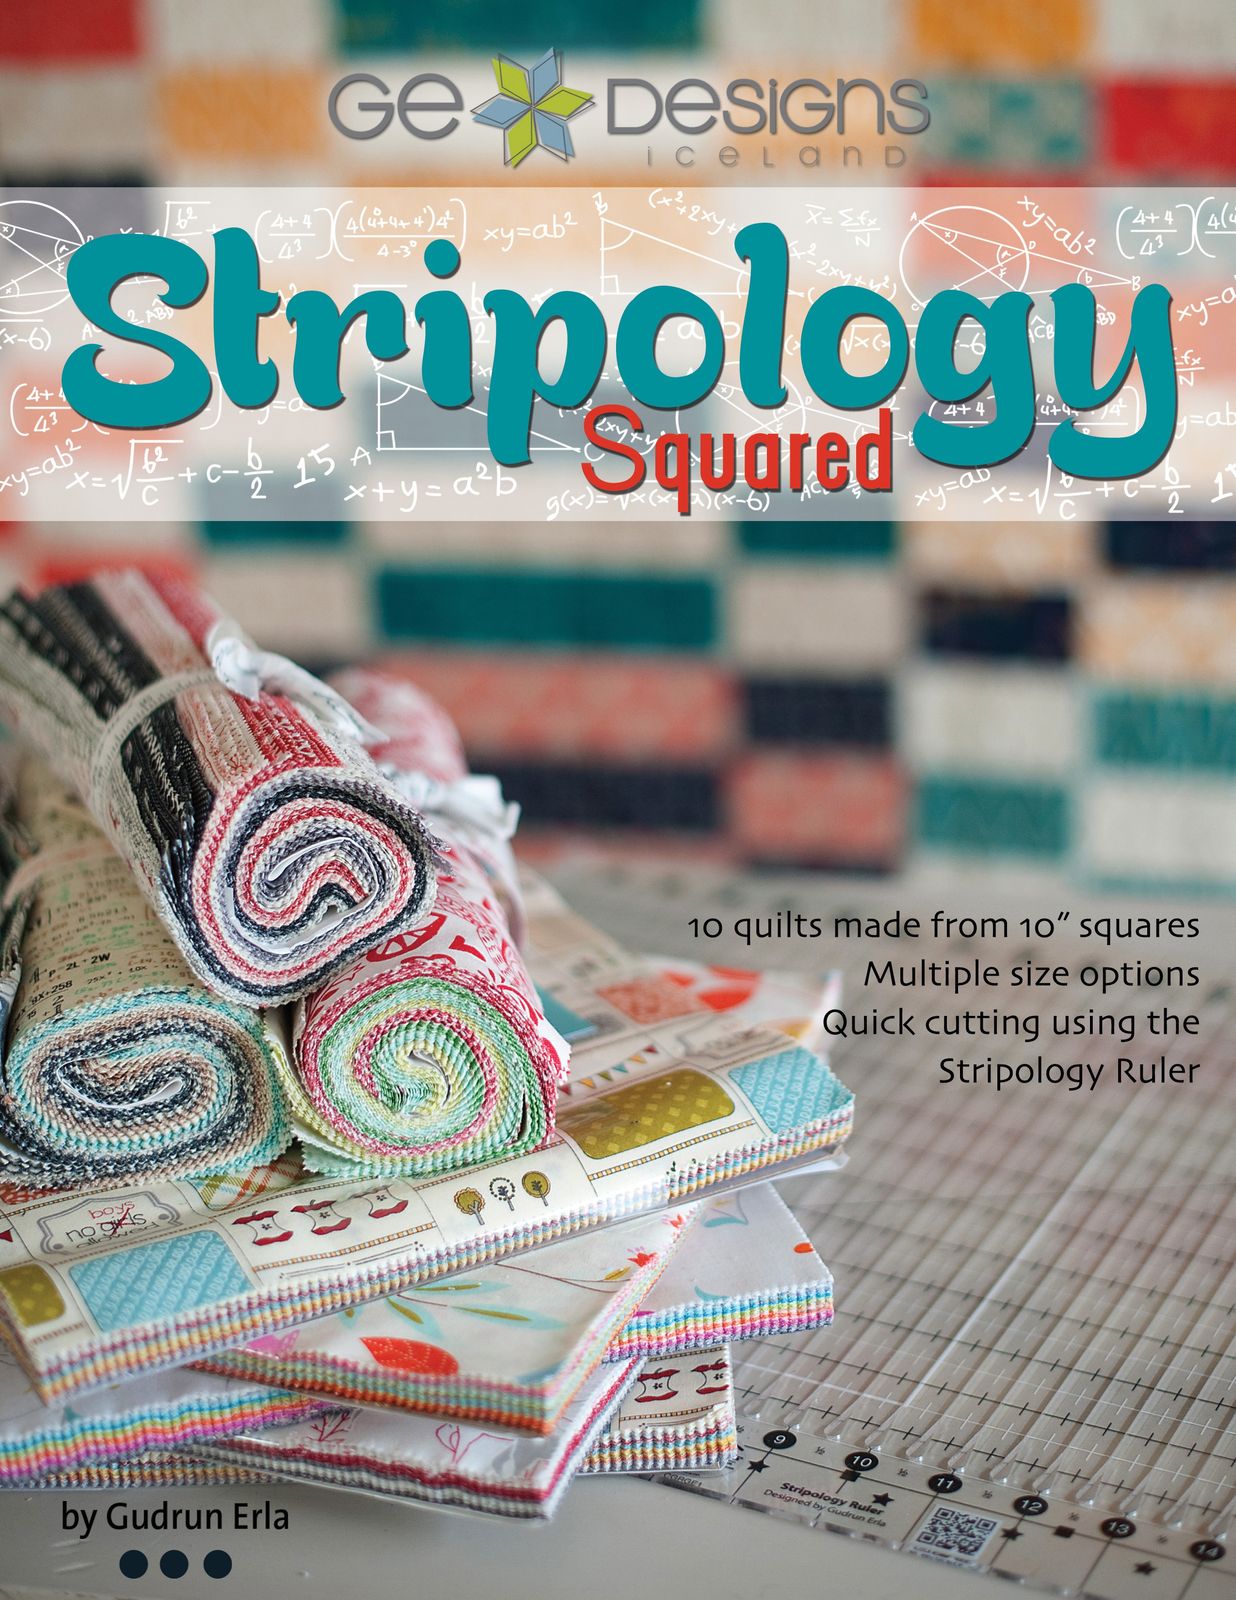 Stripology Squared Quilt Pattern Book by Gudrun Erla of G.E. Designs